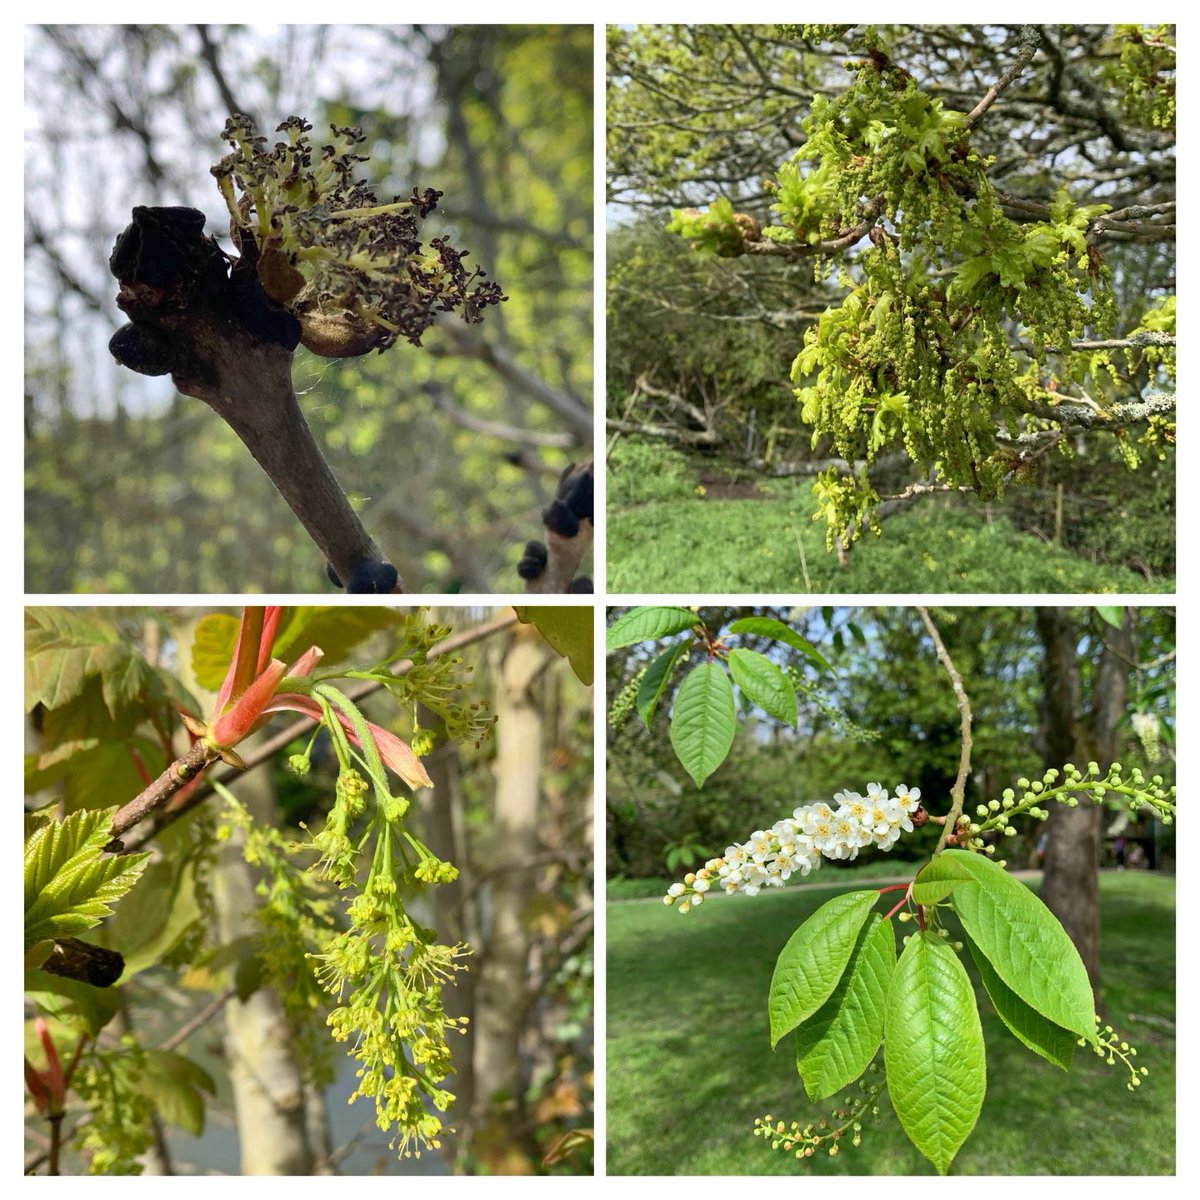 For #WildflowerHour #TreeFlowers of Ash, Oak, Sycamore and Bird Cherry in Wiltshire